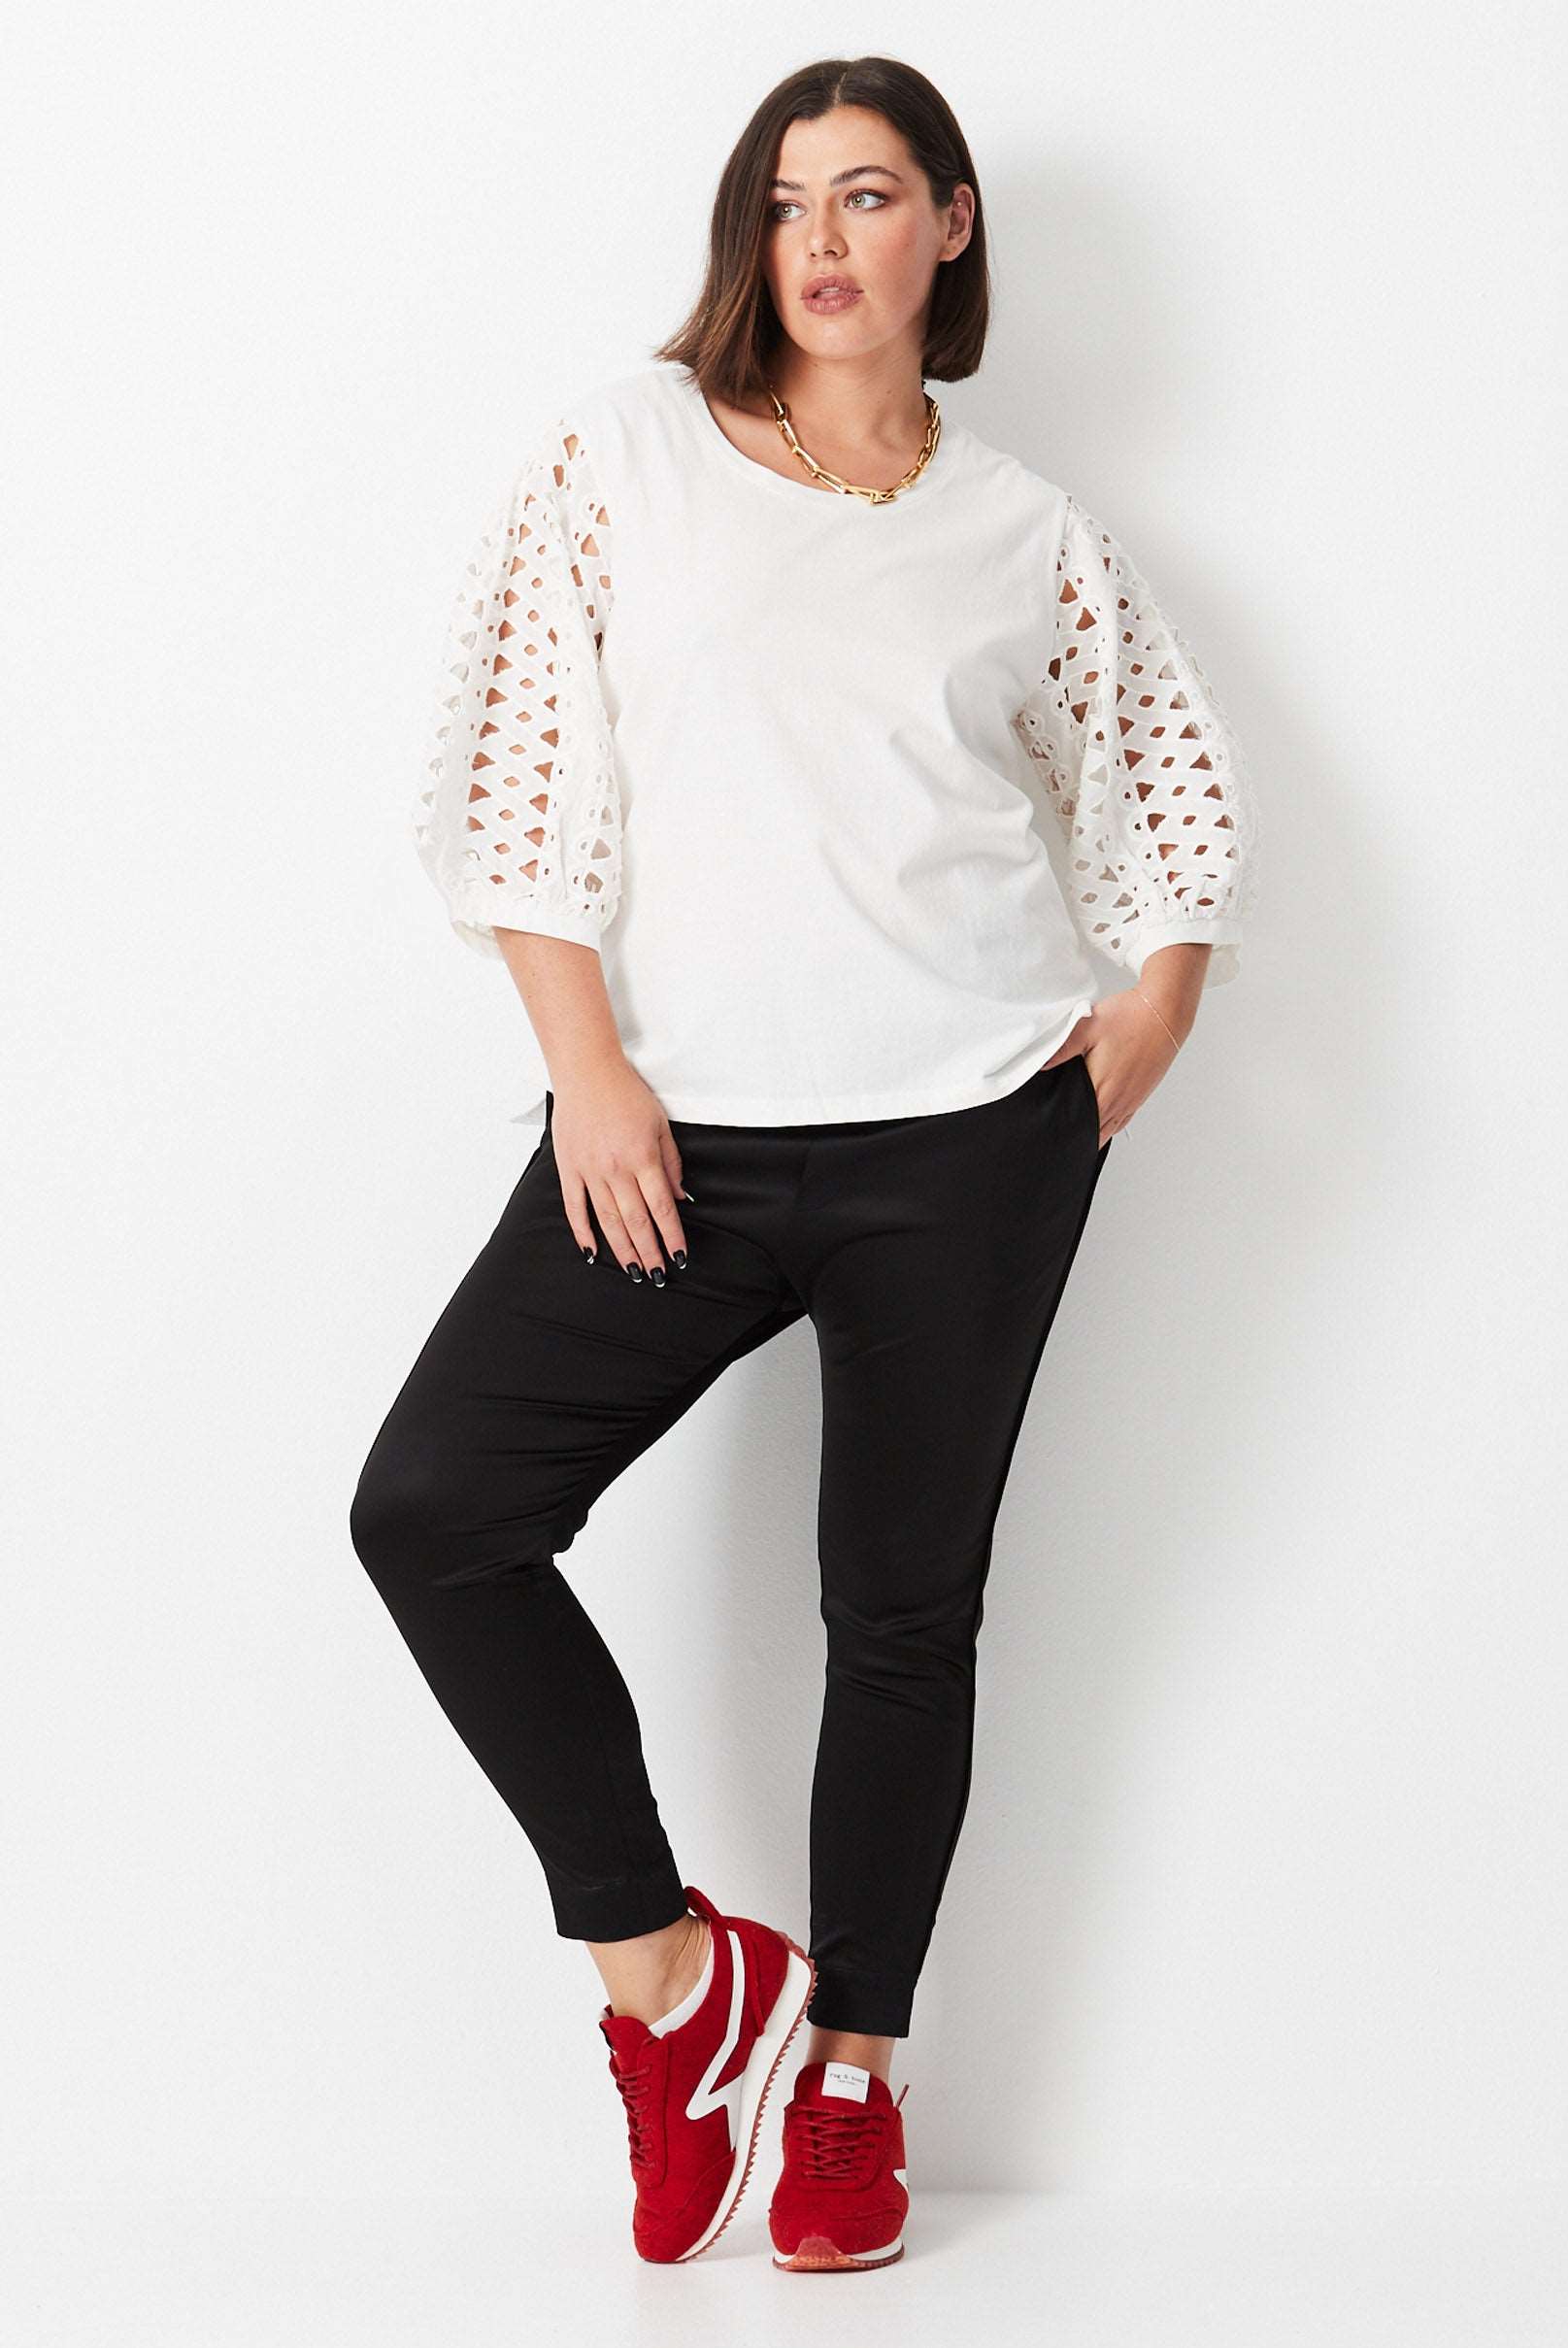 Cutwork Lace Sleeve Top - White